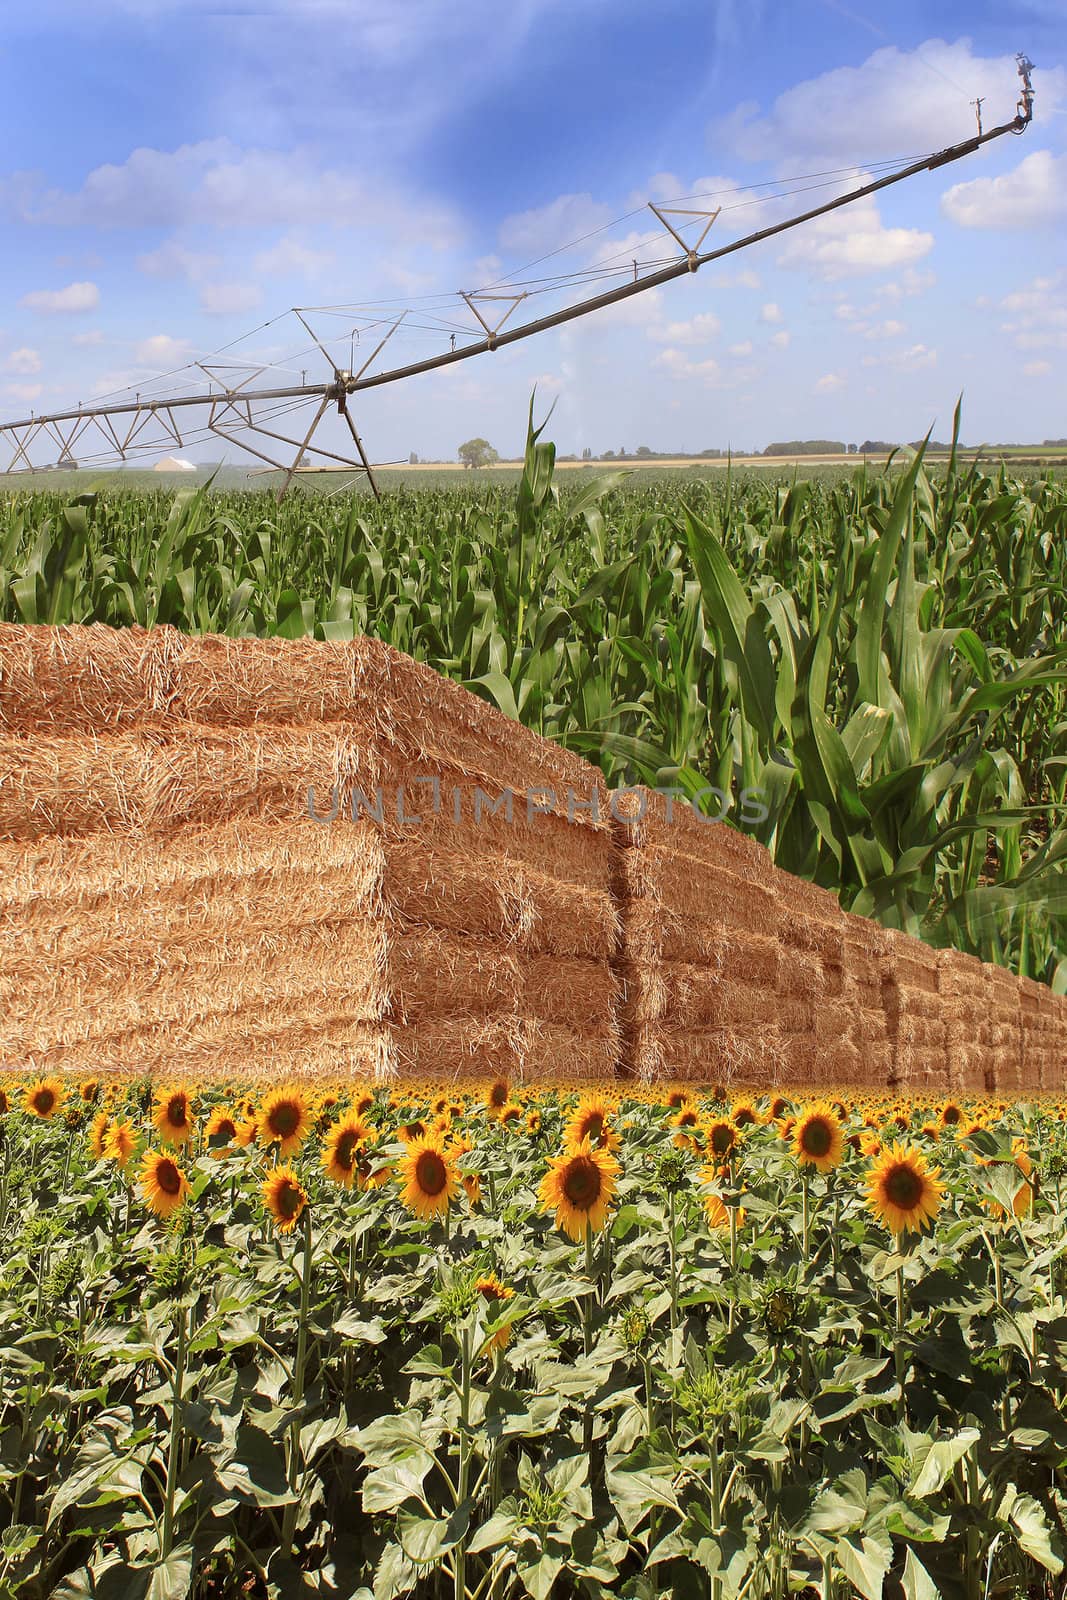 layout for organic farming with an irrigation system, bundles of straw, sunflower and corn field